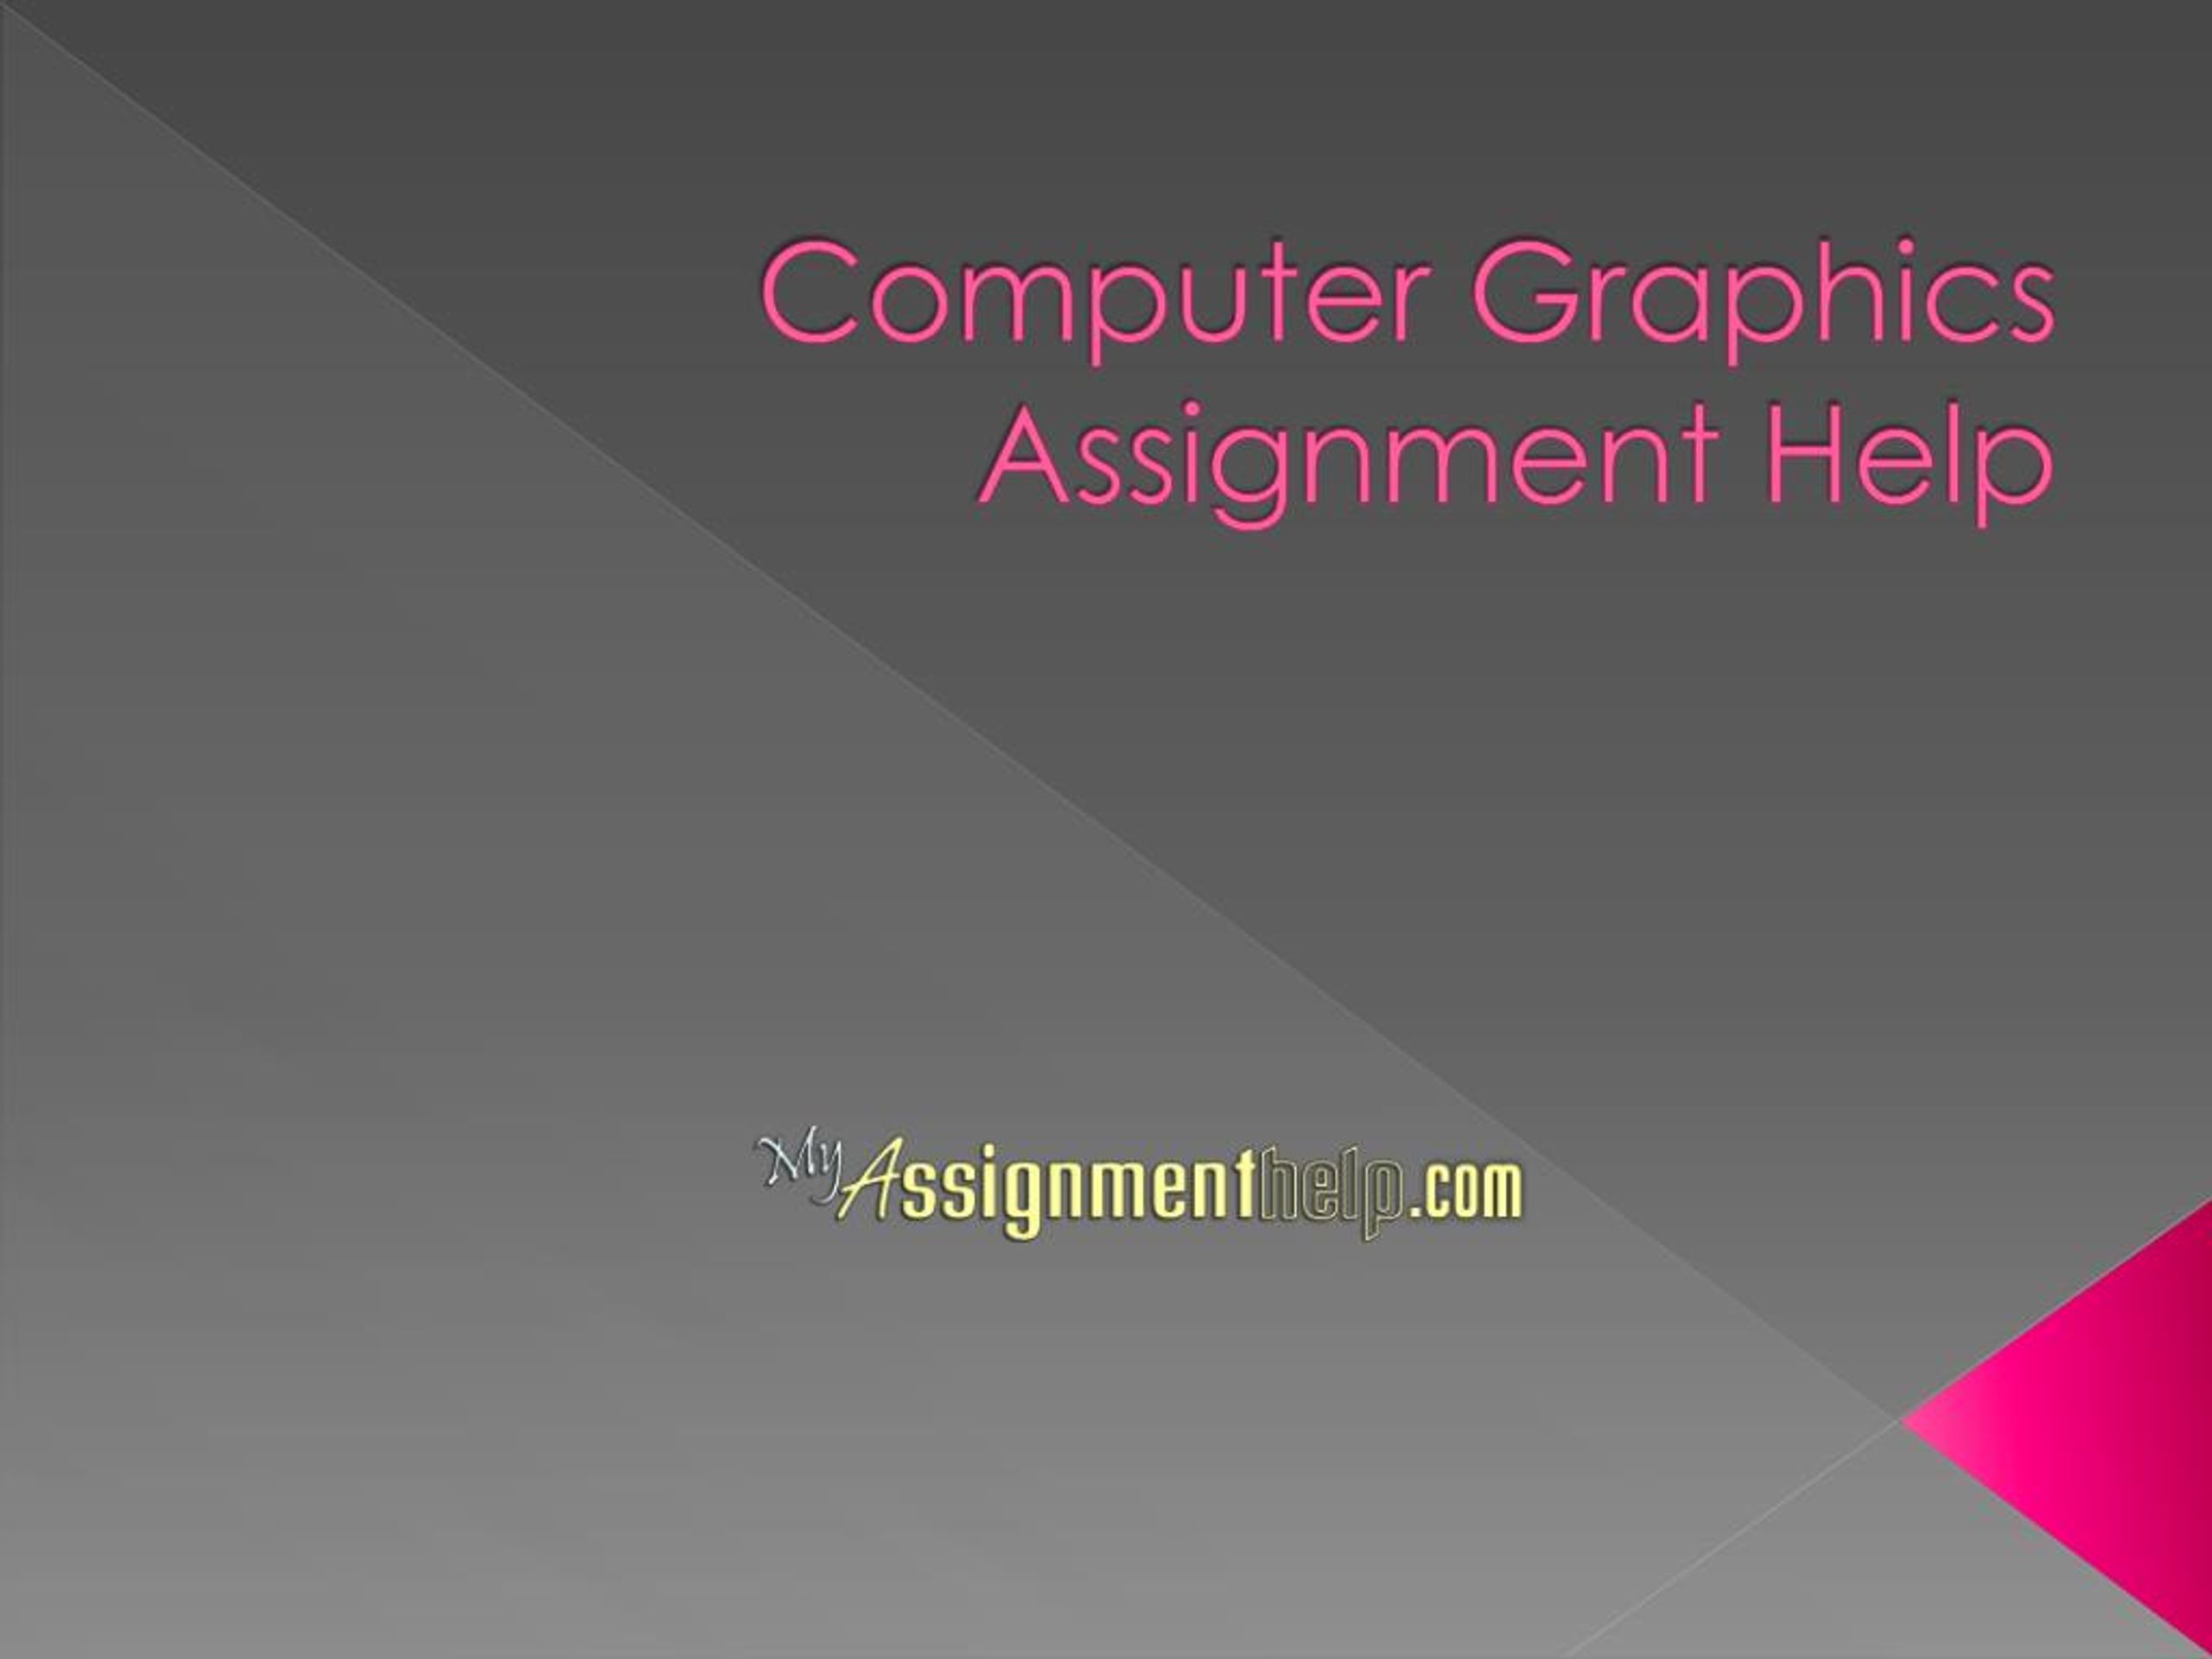 assignment on computer graphics